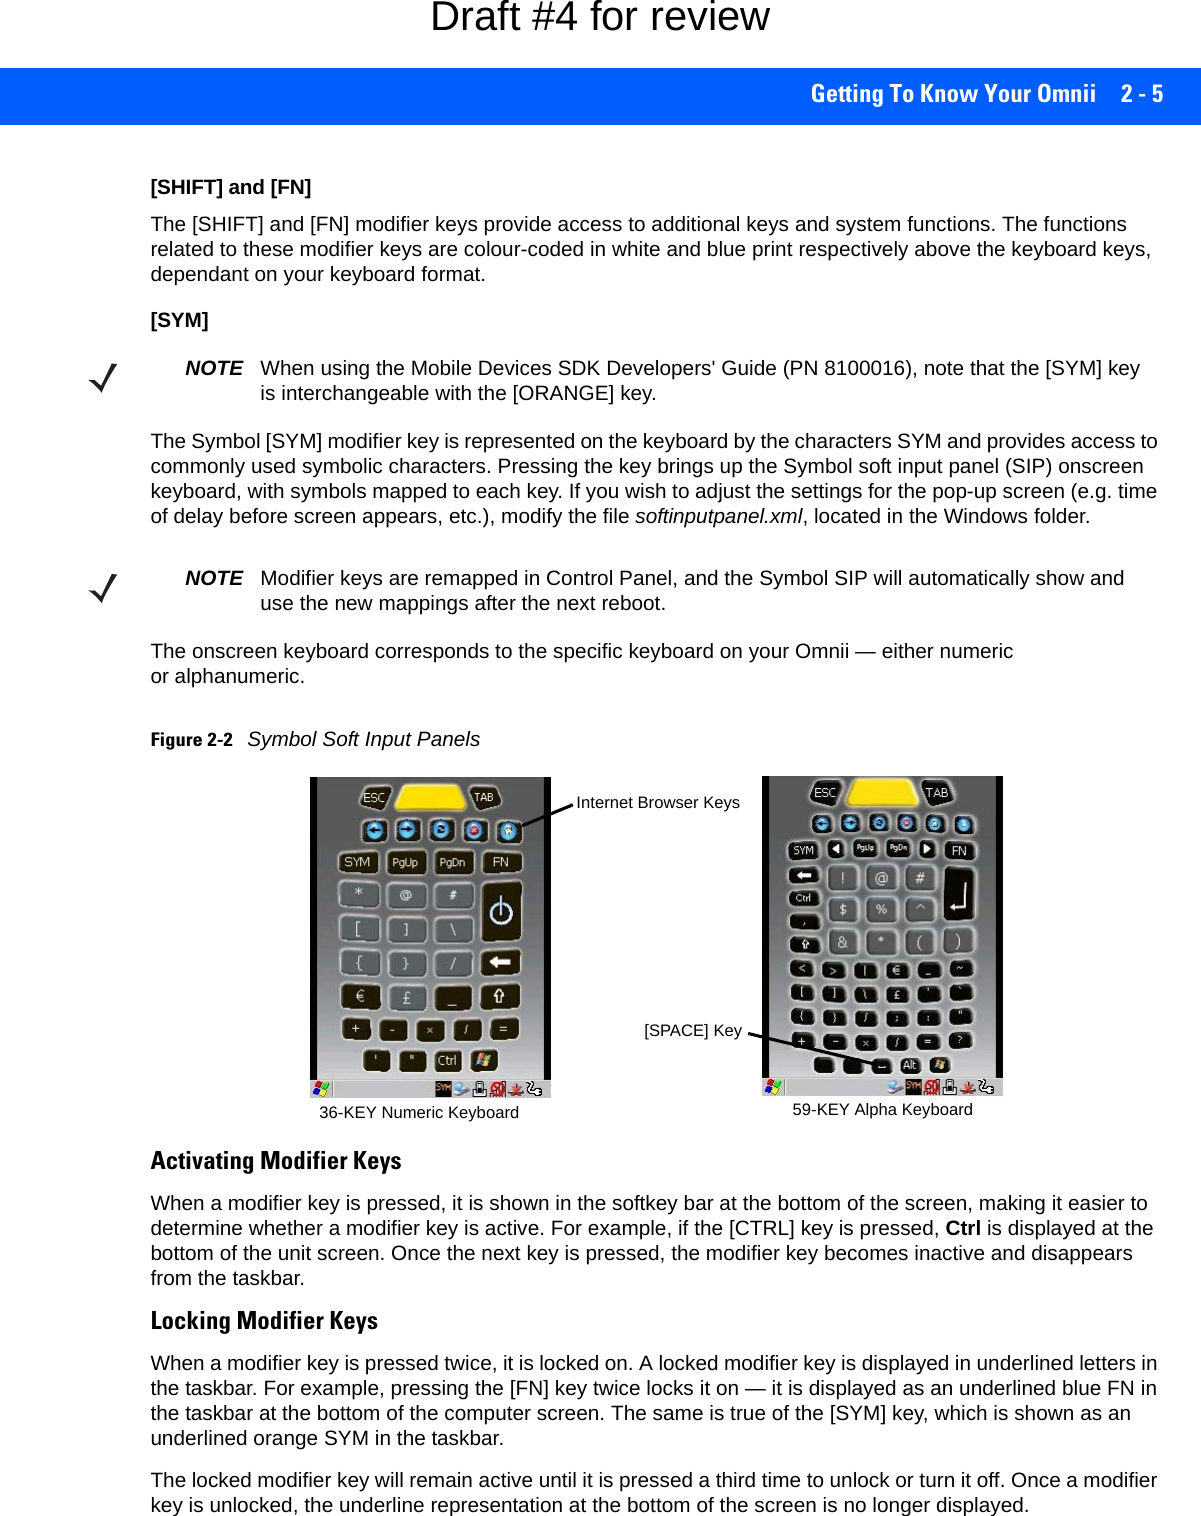 Getting To Know Your Omnii 2 - 5[SHIFT] and [FN]The [SHIFT] and [FN] modifier keys provide access to additional keys and system functions. The functions related to these modifier keys are colour-coded in white and blue print respectively above the keyboard keys, dependant on your keyboard format.[SYM] The Symbol [SYM] modifier key is represented on the keyboard by the characters SYM and provides access to commonly used symbolic characters. Pressing the key brings up the Symbol soft input panel (SIP) onscreen keyboard, with symbols mapped to each key. If you wish to adjust the settings for the pop-up screen (e.g. time of delay before screen appears, etc.), modify the file softinputpanel.xml, located in the Windows folder.The onscreen keyboard corresponds to the specific keyboard on your Omnii — either numeric or alphanumeric. Figure 2-2Symbol Soft Input PanelsActivating Modifier KeysWhen a modifier key is pressed, it is shown in the softkey bar at the bottom of the screen, making it easier to determine whether a modifier key is active. For example, if the [CTRL] key is pressed, Ctrl is displayed at the bottom of the unit screen. Once the next key is pressed, the modifier key becomes inactive and disappears from the taskbar.Locking Modifier KeysWhen a modifier key is pressed twice, it is locked on. A locked modifier key is displayed in underlined letters in the taskbar. For example, pressing the [FN] key twice locks it on — it is displayed as an underlined blue FN in the taskbar at the bottom of the computer screen. The same is true of the [SYM] key, which is shown as an underlined orange SYM in the taskbar.The locked modifier key will remain active until it is pressed a third time to unlock or turn it off. Once a modifier key is unlocked, the underline representation at the bottom of the screen is no longer displayed.NOTE When using the Mobile Devices SDK Developers&apos; Guide (PN 8100016), note that the [SYM] key is interchangeable with the [ORANGE] key.NOTE Modifier keys are remapped in Control Panel, and the Symbol SIP will automatically show and use the new mappings after the next reboot.36-KEY Numeric Keyboard 59-KEY Alpha Keyboard[SPACE] KeyInternet Browser KeysDraft #4 for review